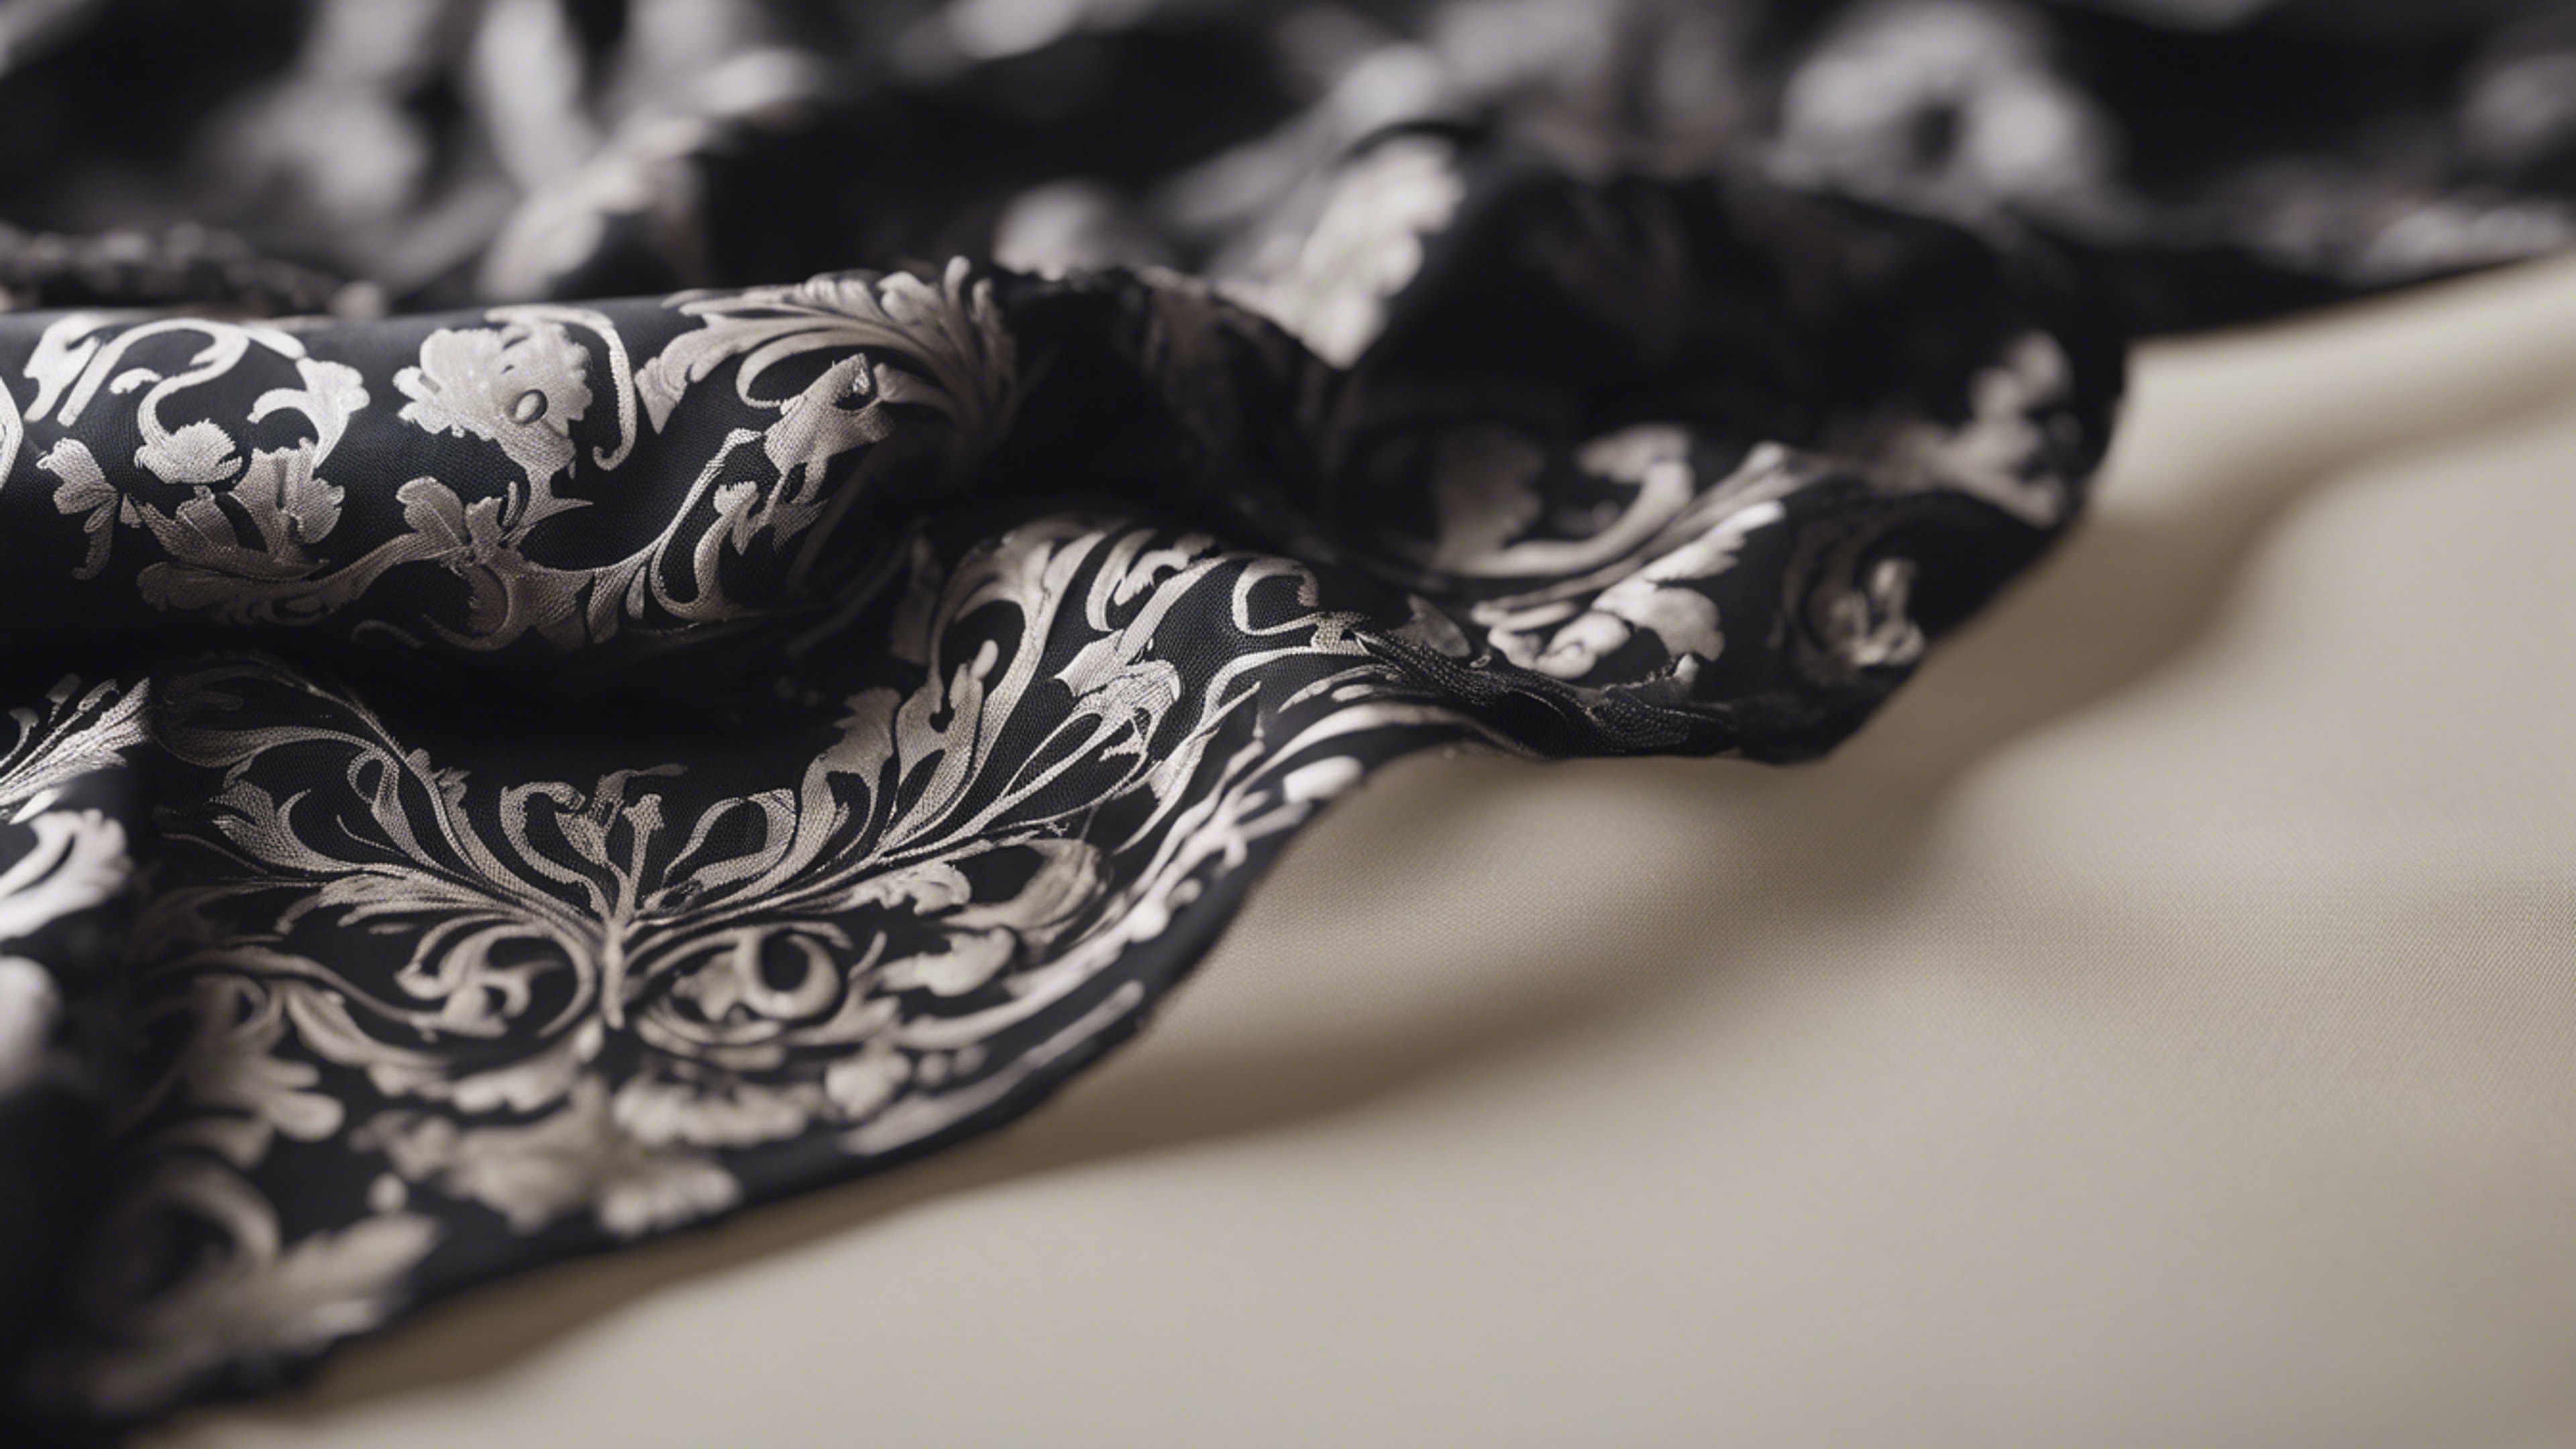 A piece of black damask fabric flowing in the wind on a neutral background. Fond d'écran[14b62583c63644549a6a]